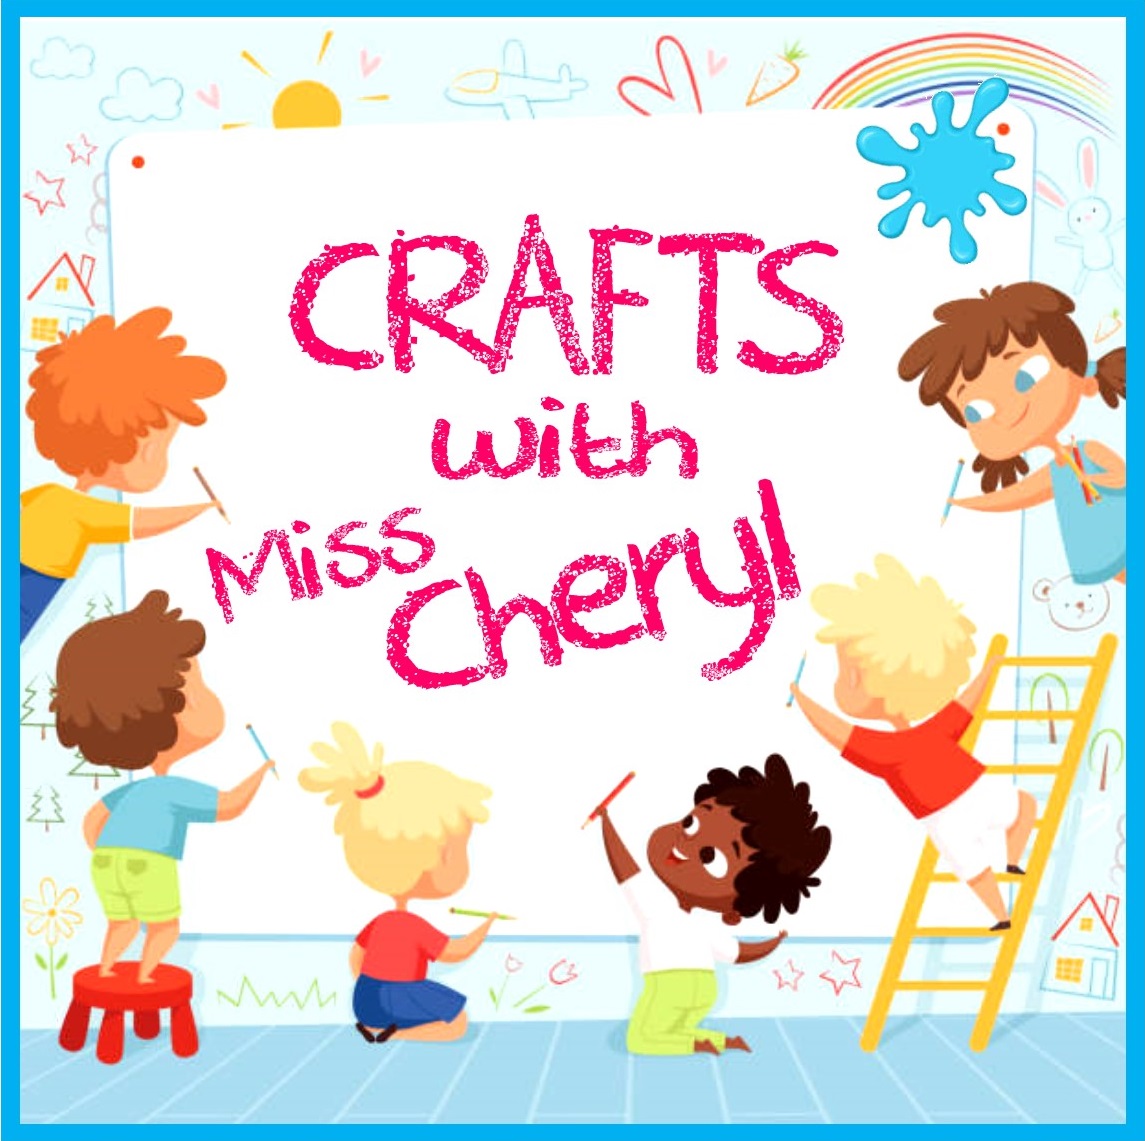 Crafts with Miss Cheryl